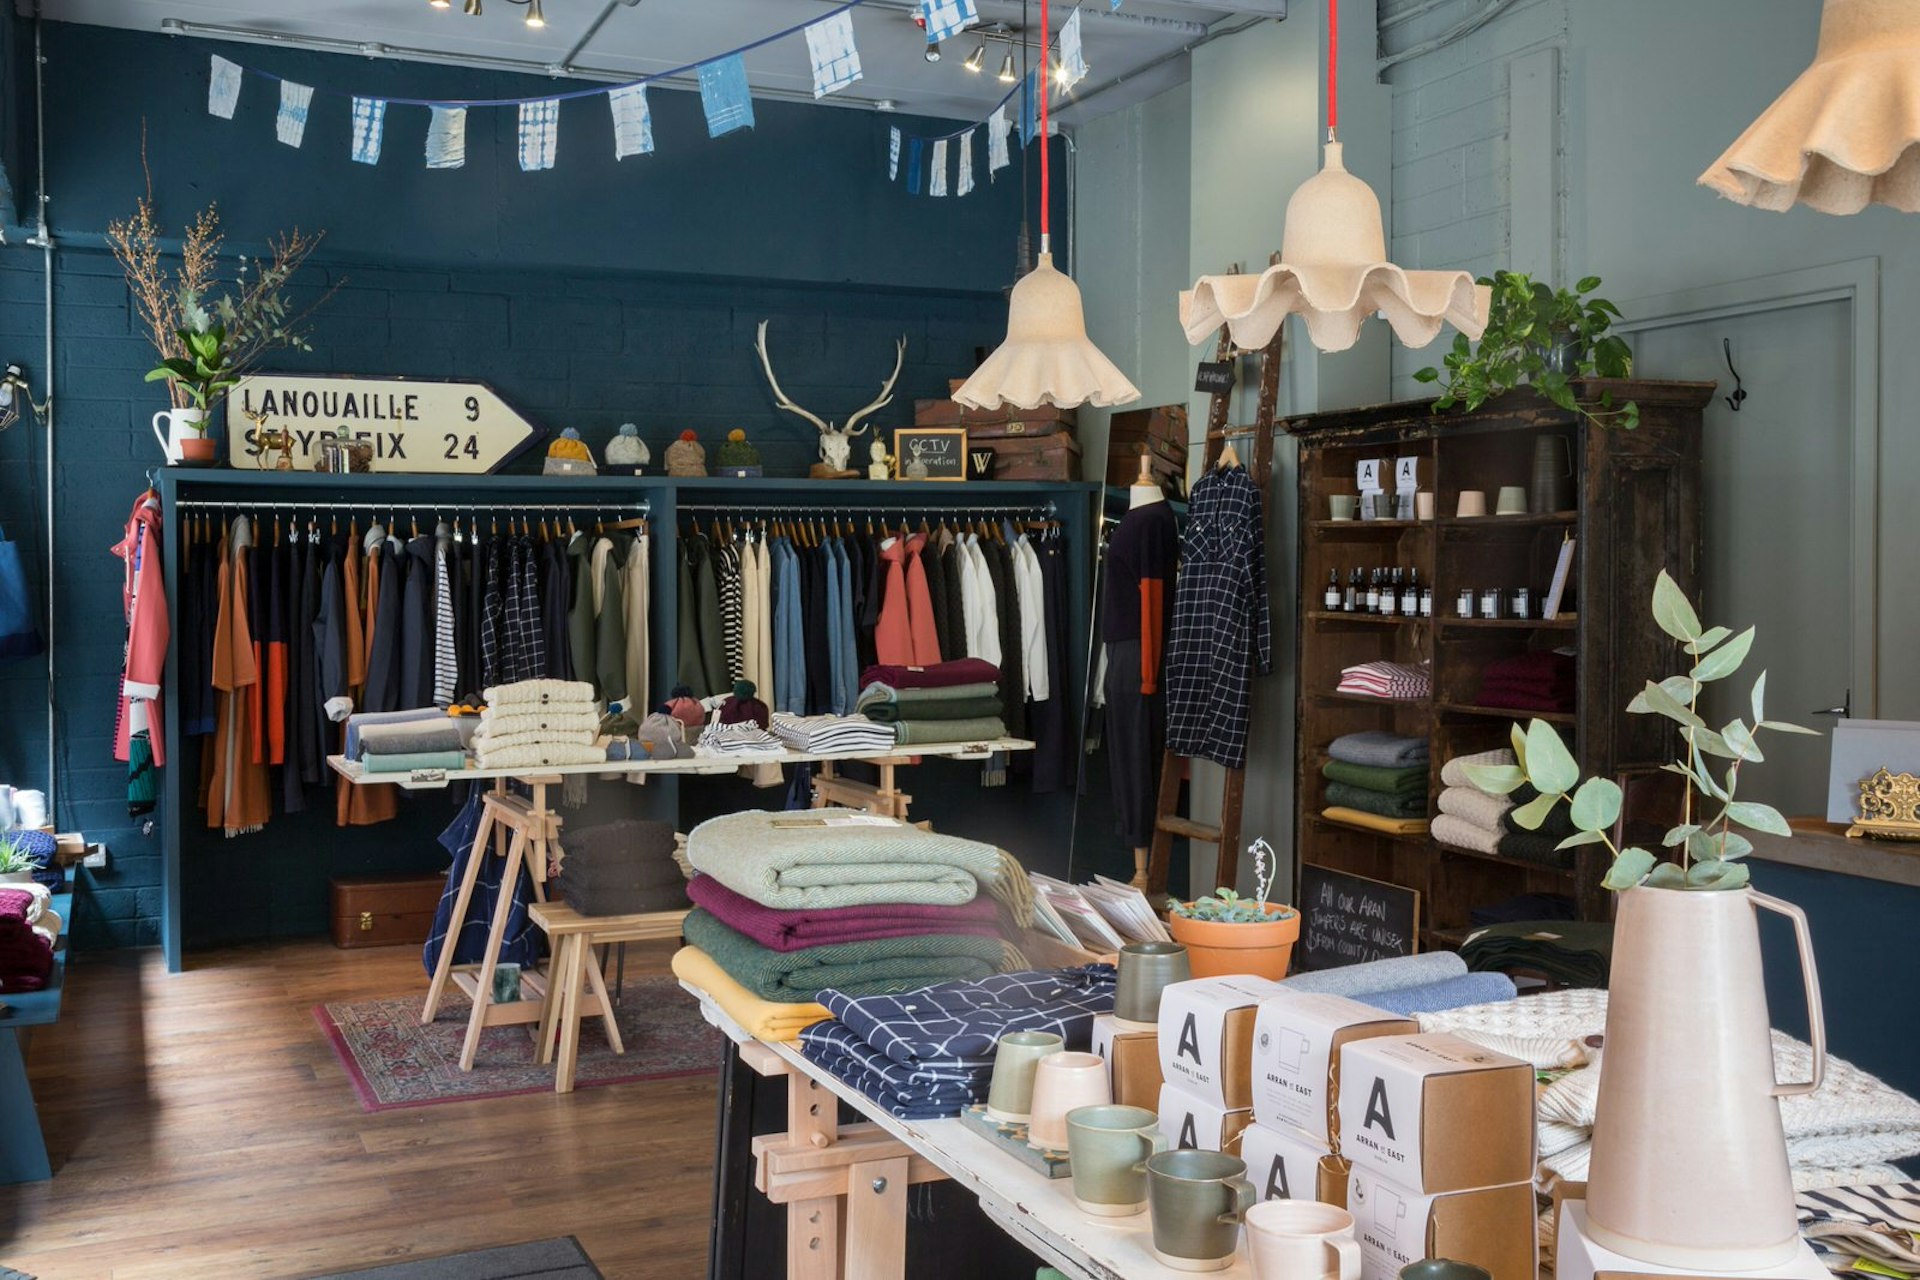 Dublin independent shops - the interior of Scout. There is a rail of multicoloured clothes against a teal wall with a road sign and horned skull on top. Blue bunting hangs from the roof and there is a table of folded clothes, mugs and homewares in the foreground as well as a variety of lampshades hanging at different lengths from the roof